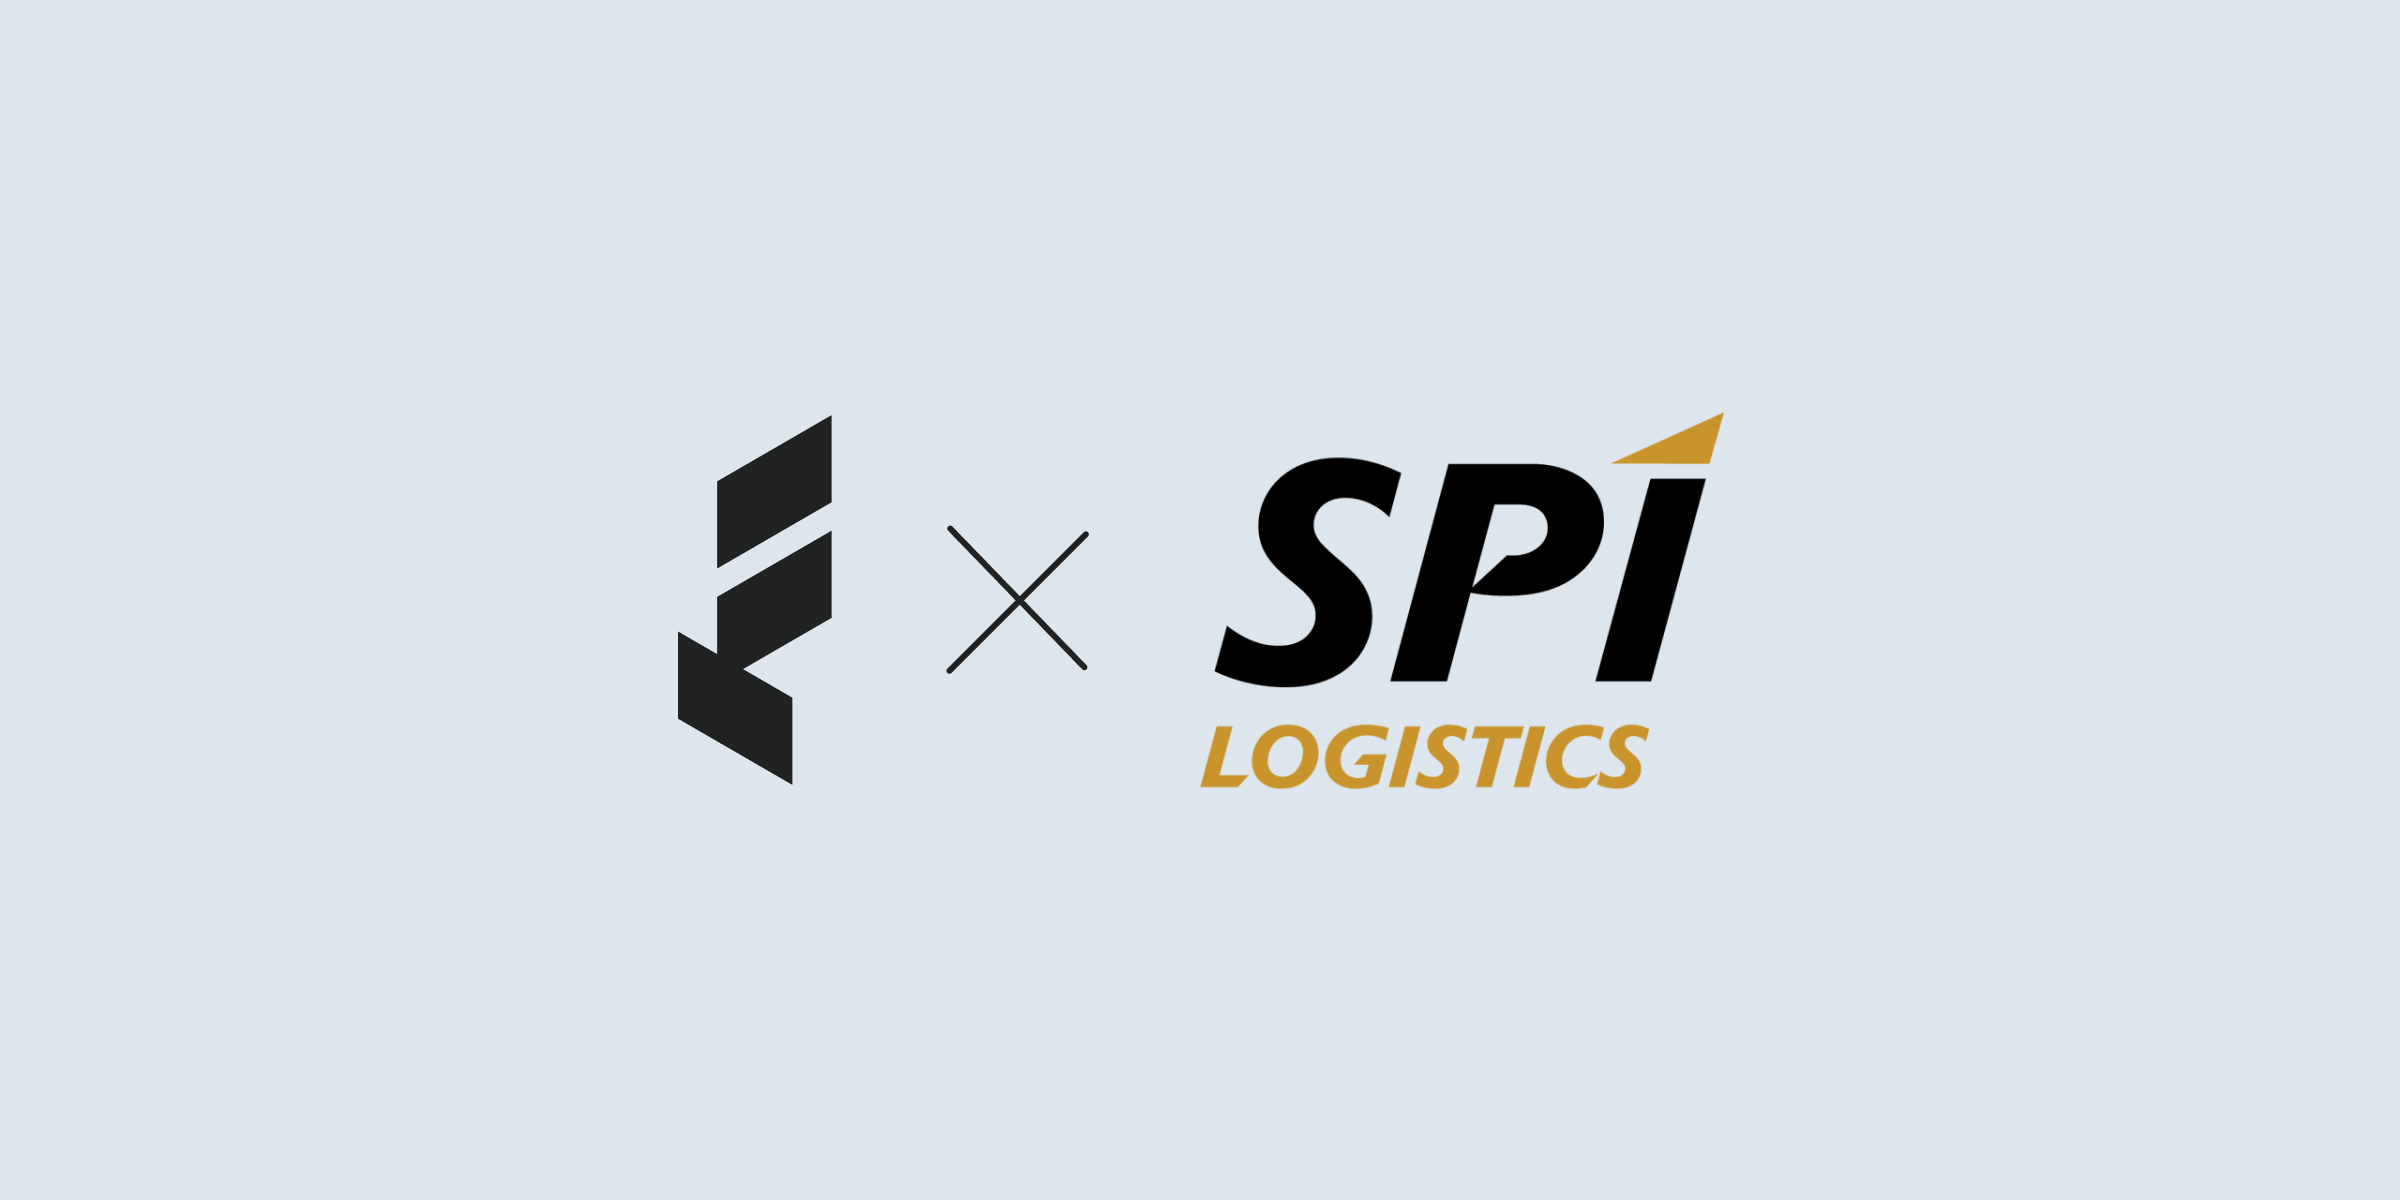 SPI Logistics Chose Float to Bring Their Vendor Payments Into the Digital-Age